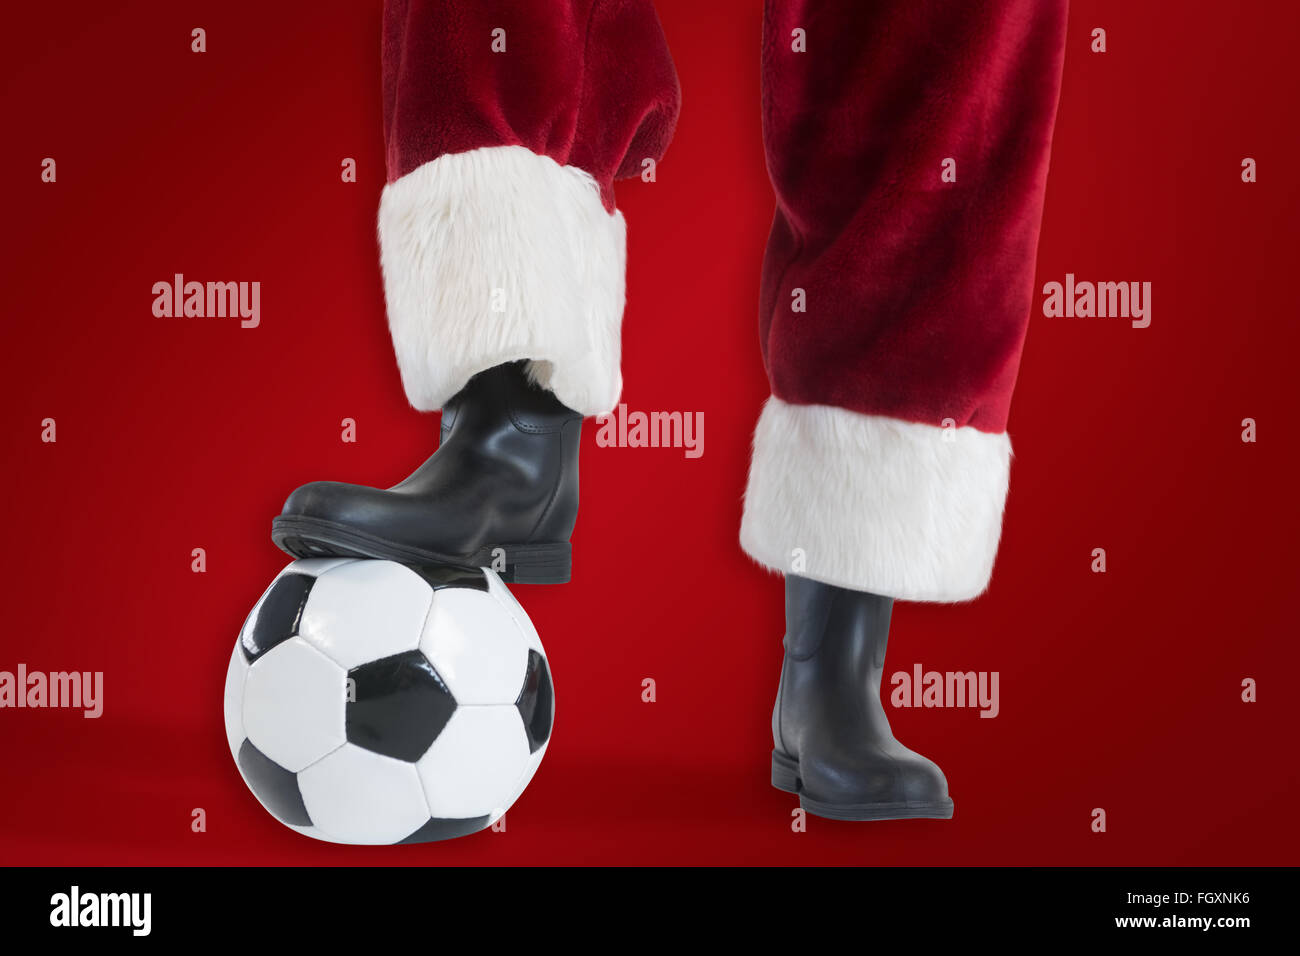 https://c8.alamy.com/comp/FGXNK6/composite-image-of-santa-claus-is-playing-soccer-FGXNK6.jpg